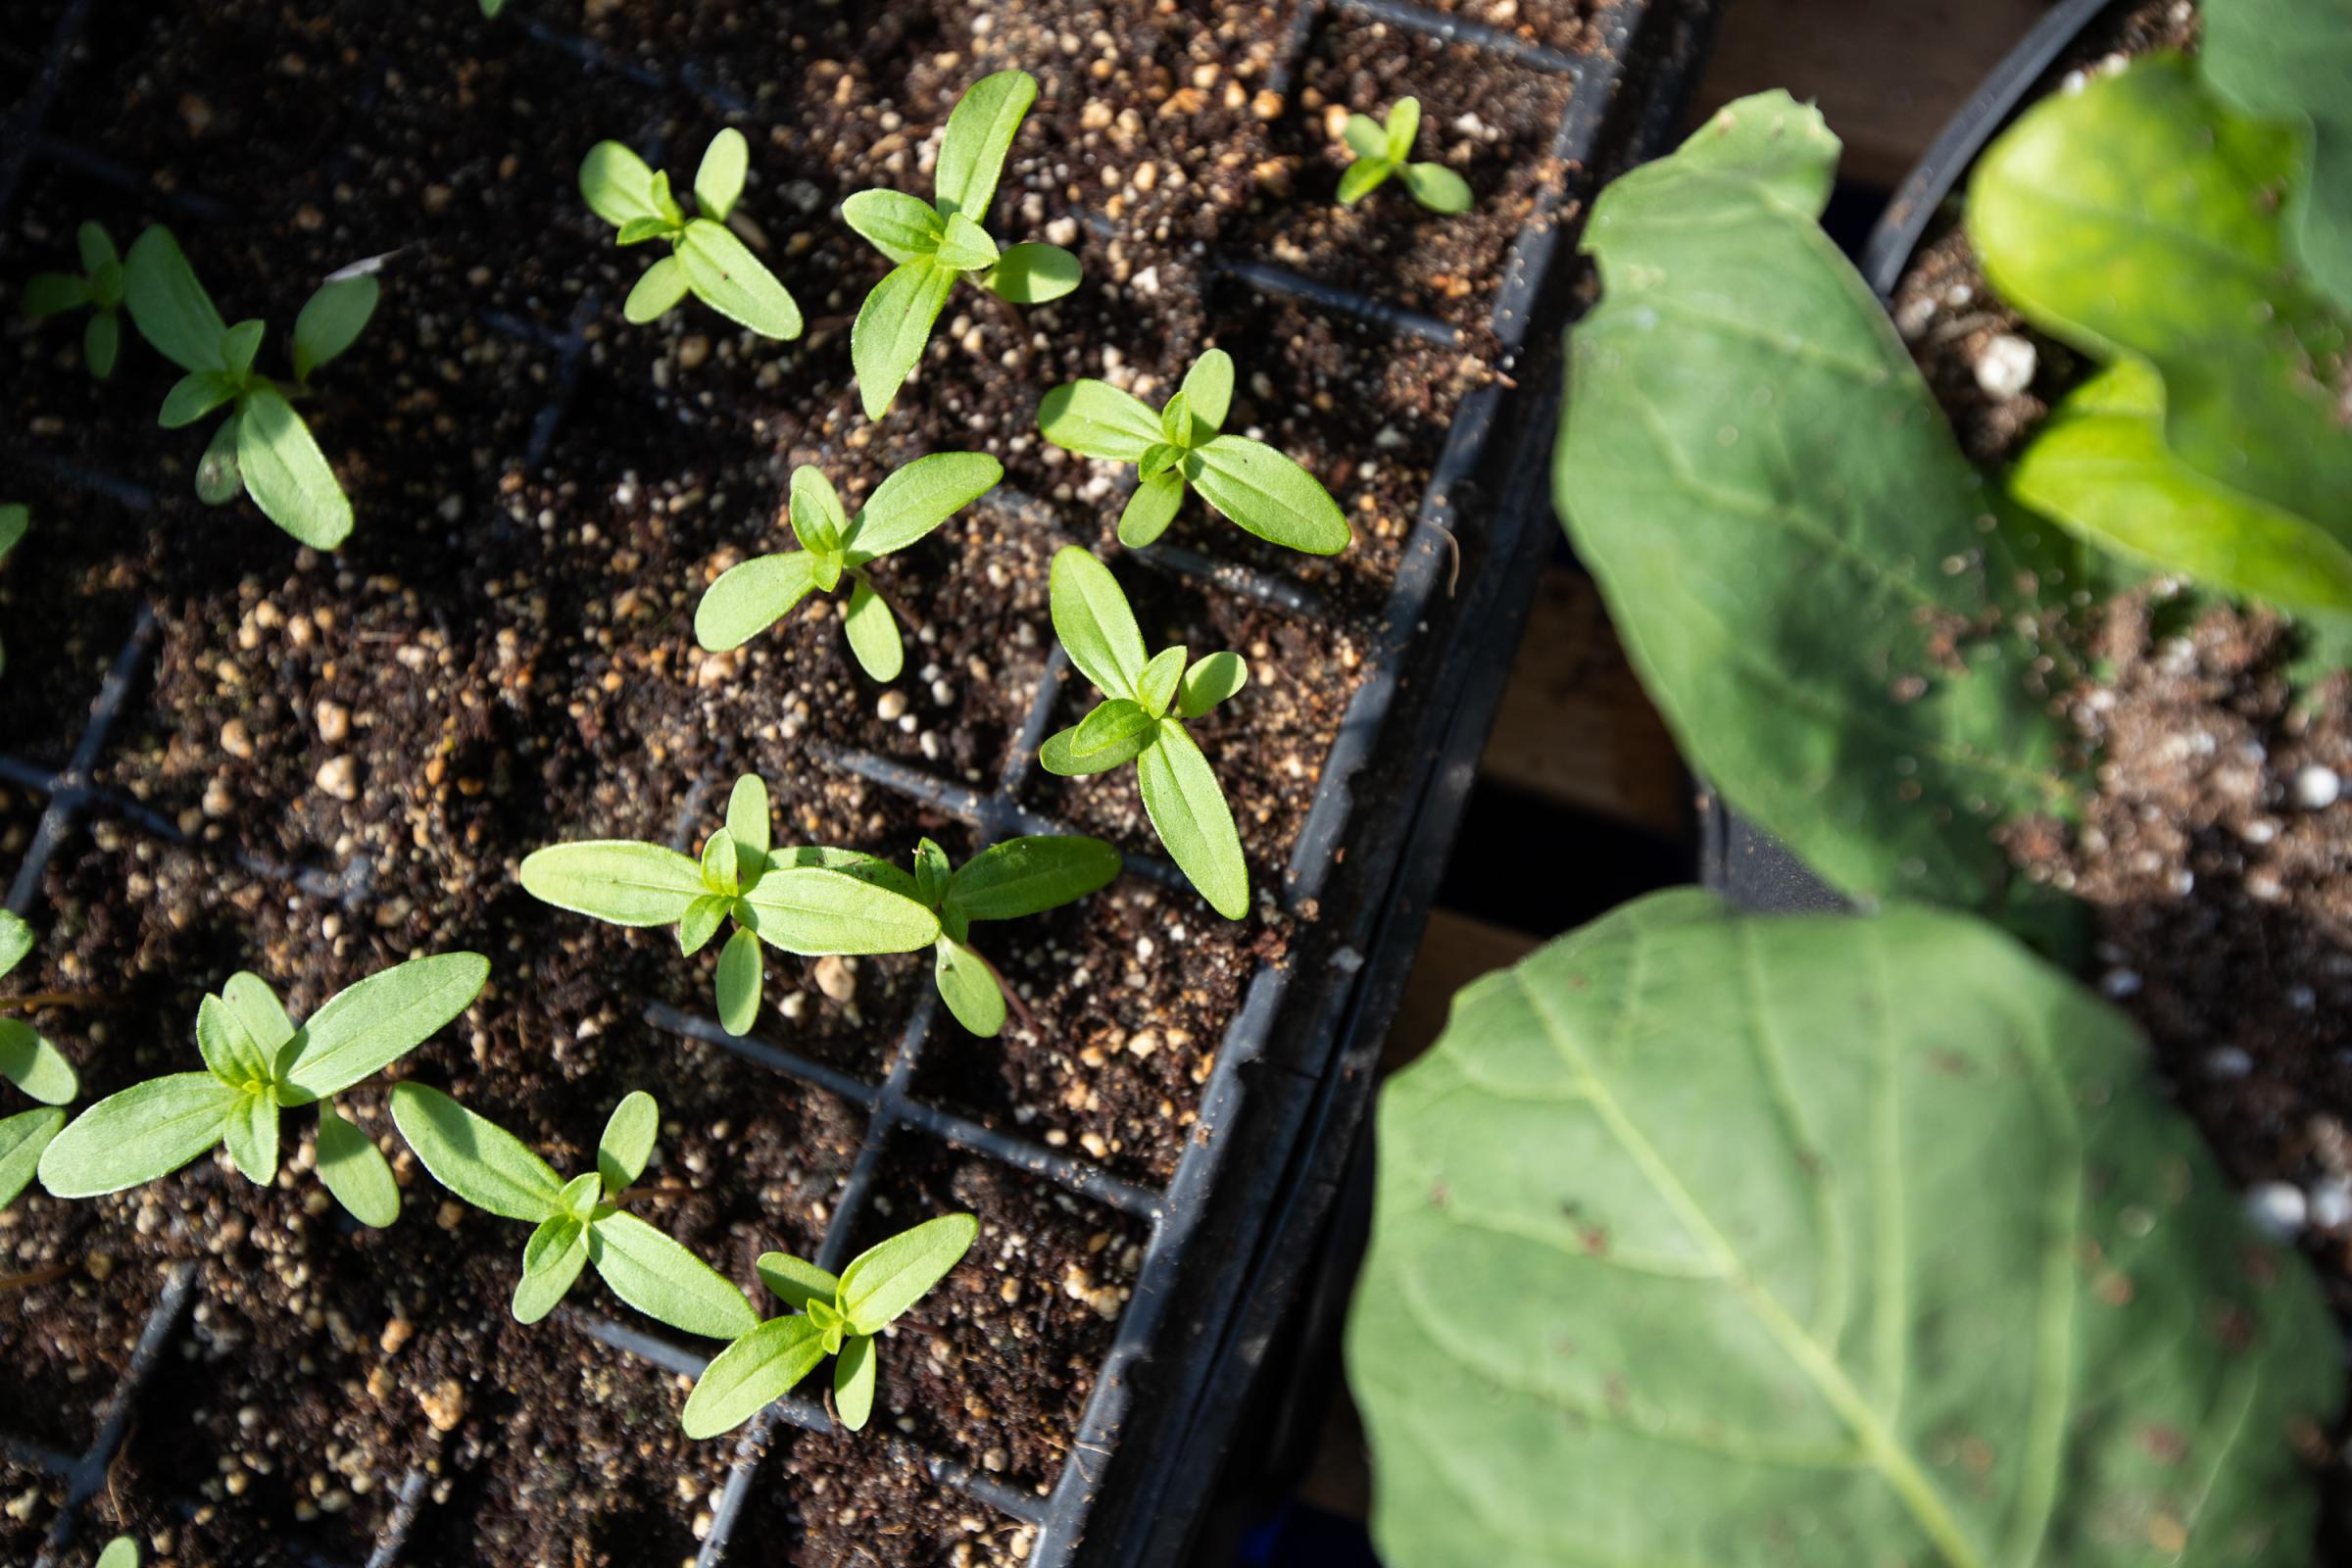 Seedlings grow in planter trays at the Spence Neighbourhood Association community greenhouse in Winnipeg. May 5, 2022.